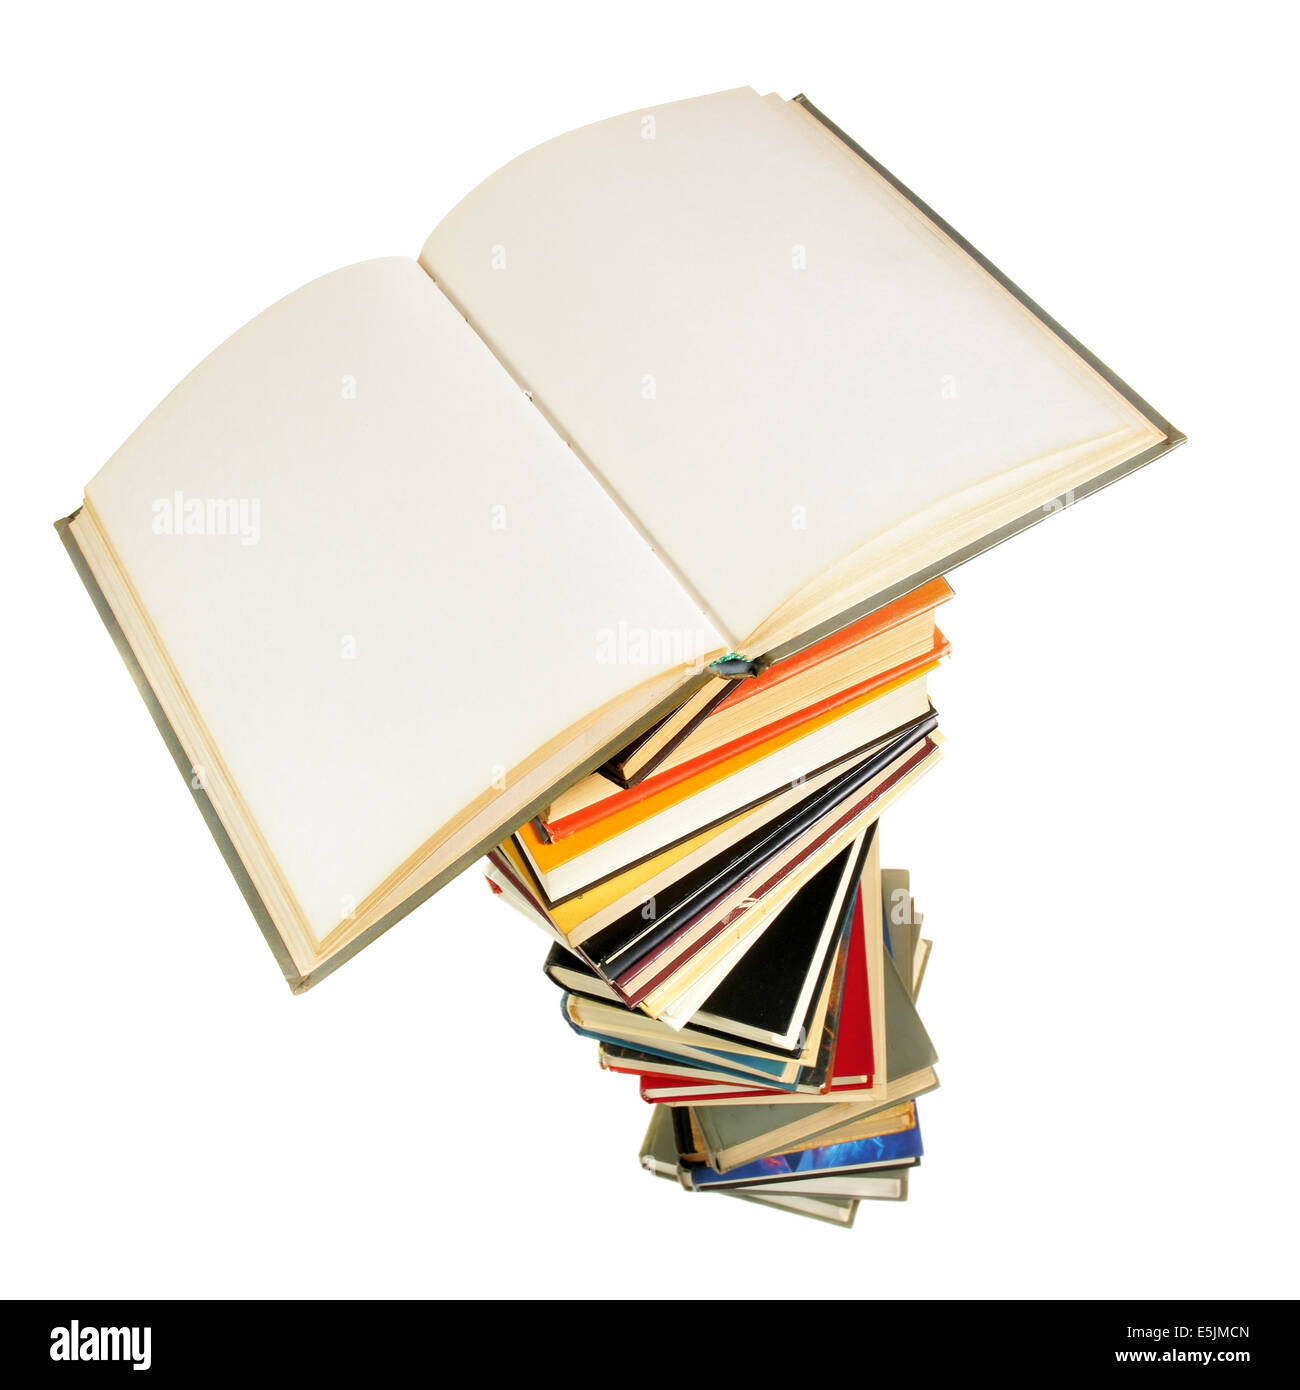 Opened book with blank pages isolated over white background Stock Photo